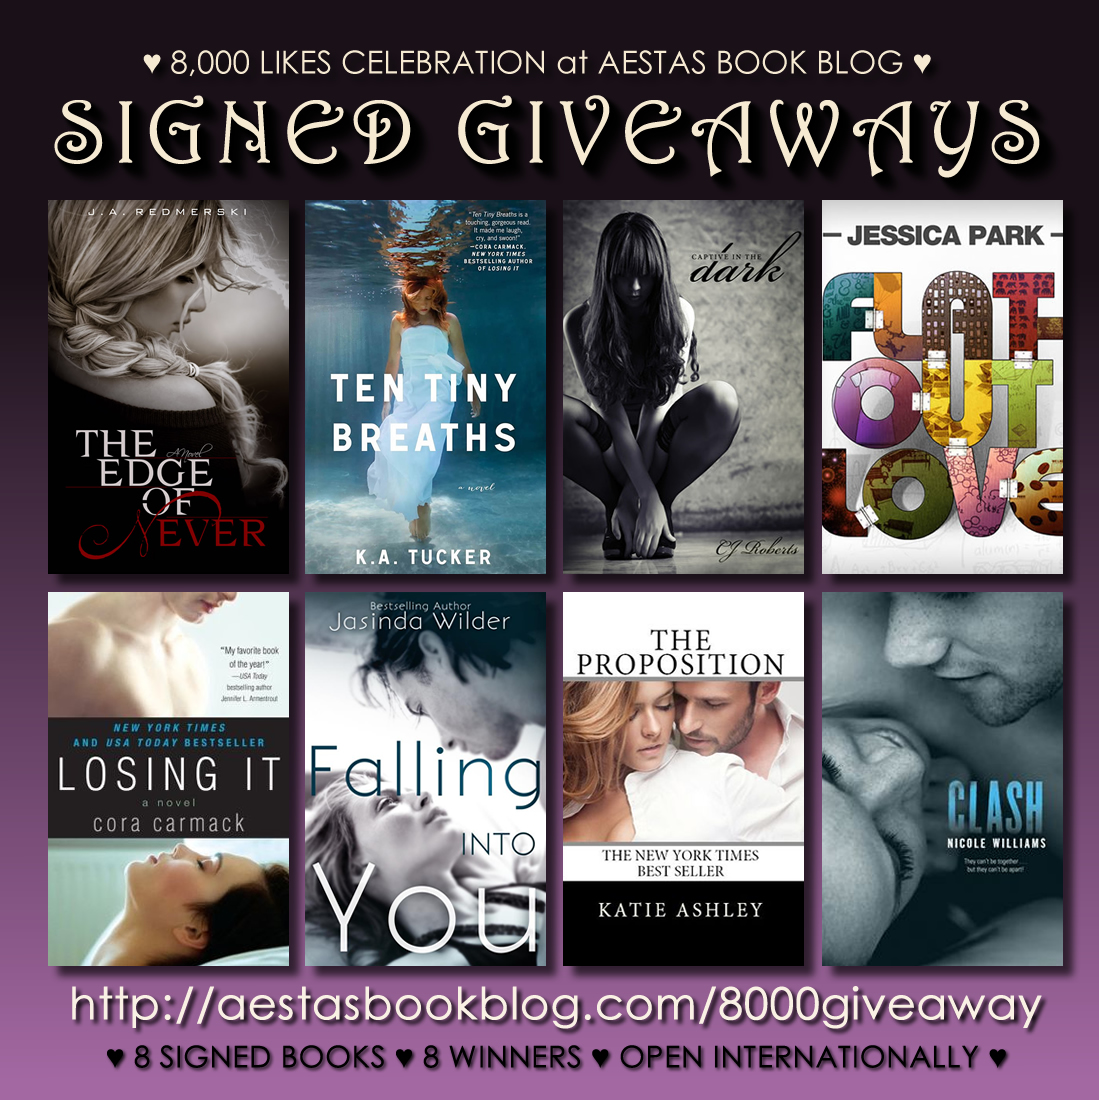 ♥ SIGNED BOOK GIVEAWAY ♥ Thank you for the 8,000 Likes